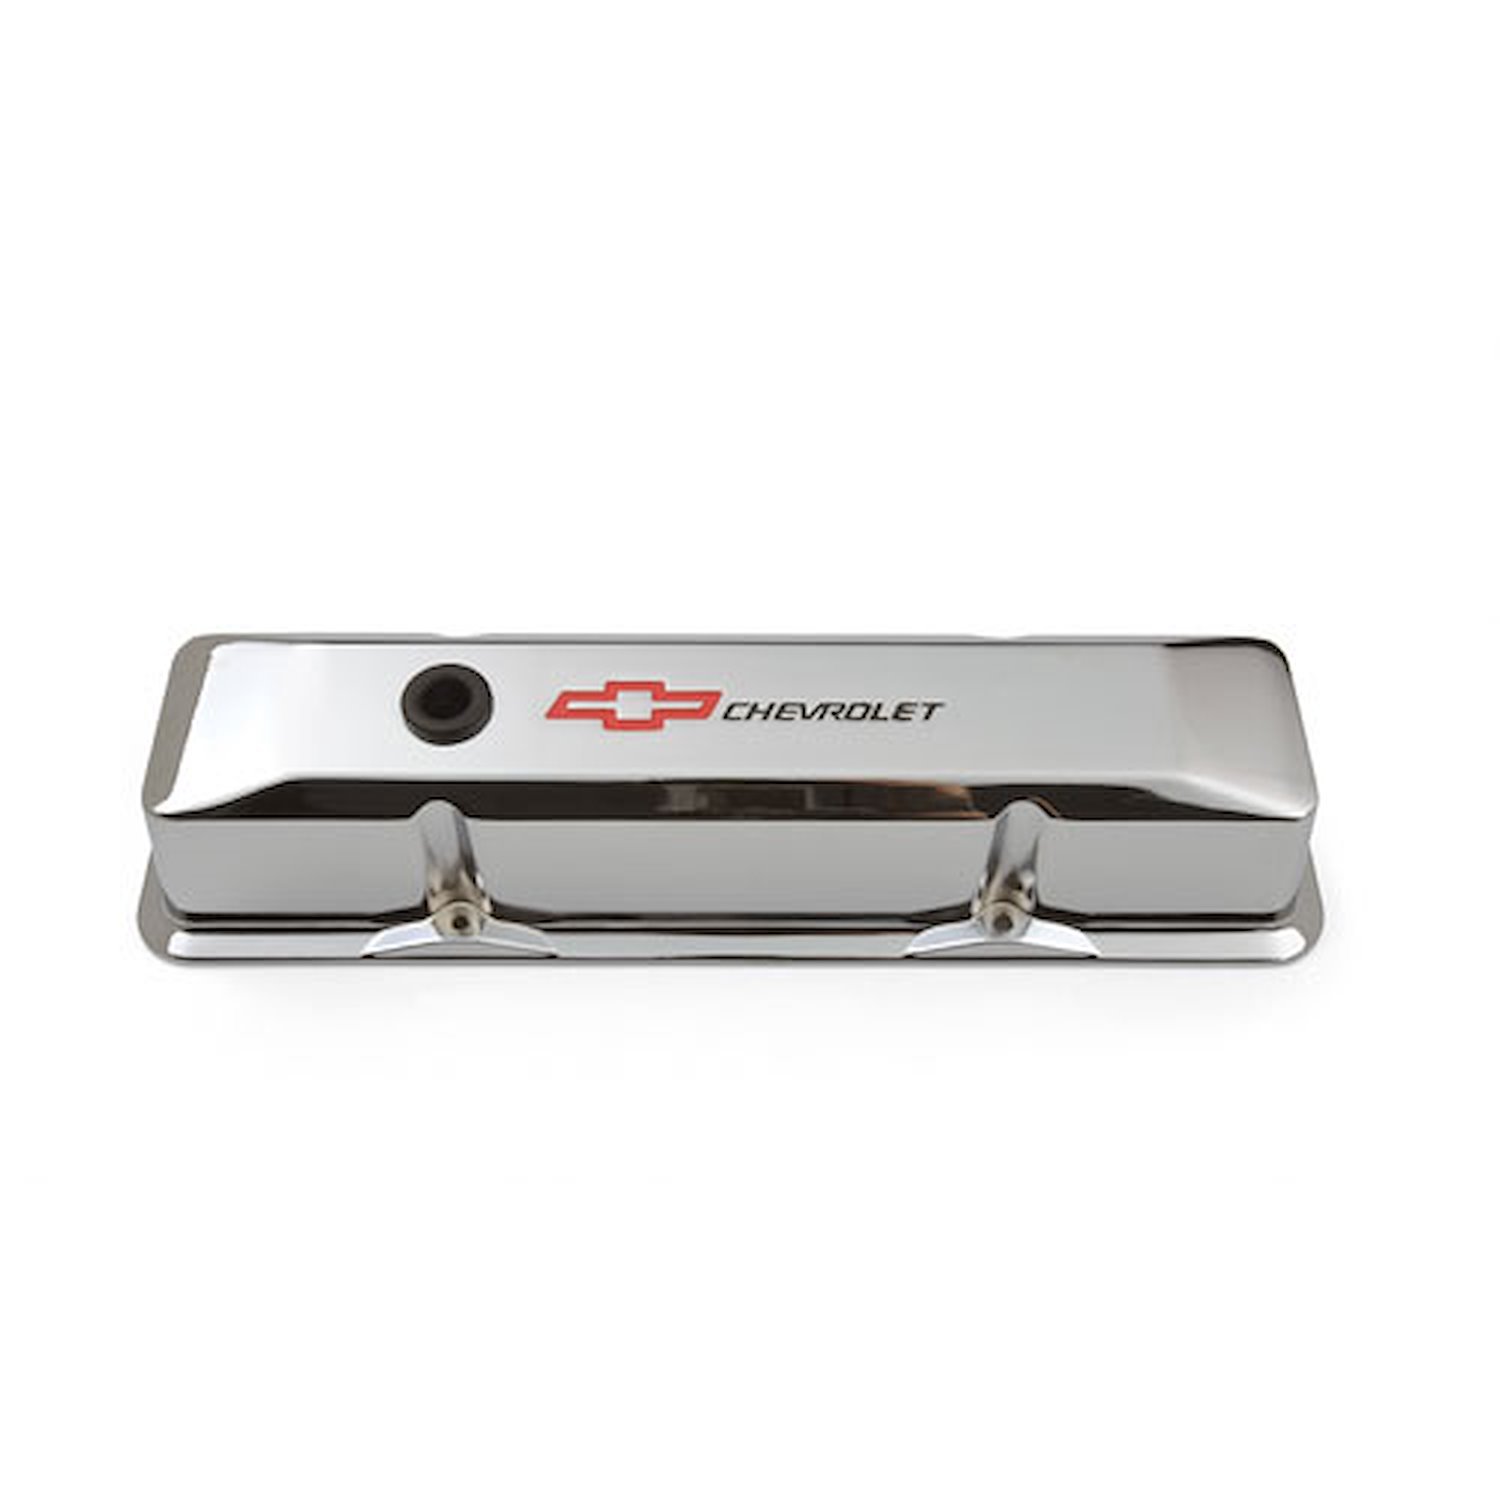 Die-Cast Aluminum Tall Valve Covers for 1958-1986 Small Block Chevy with Chevrolet/Bowtie Recessed Emblem in Chrome Finish